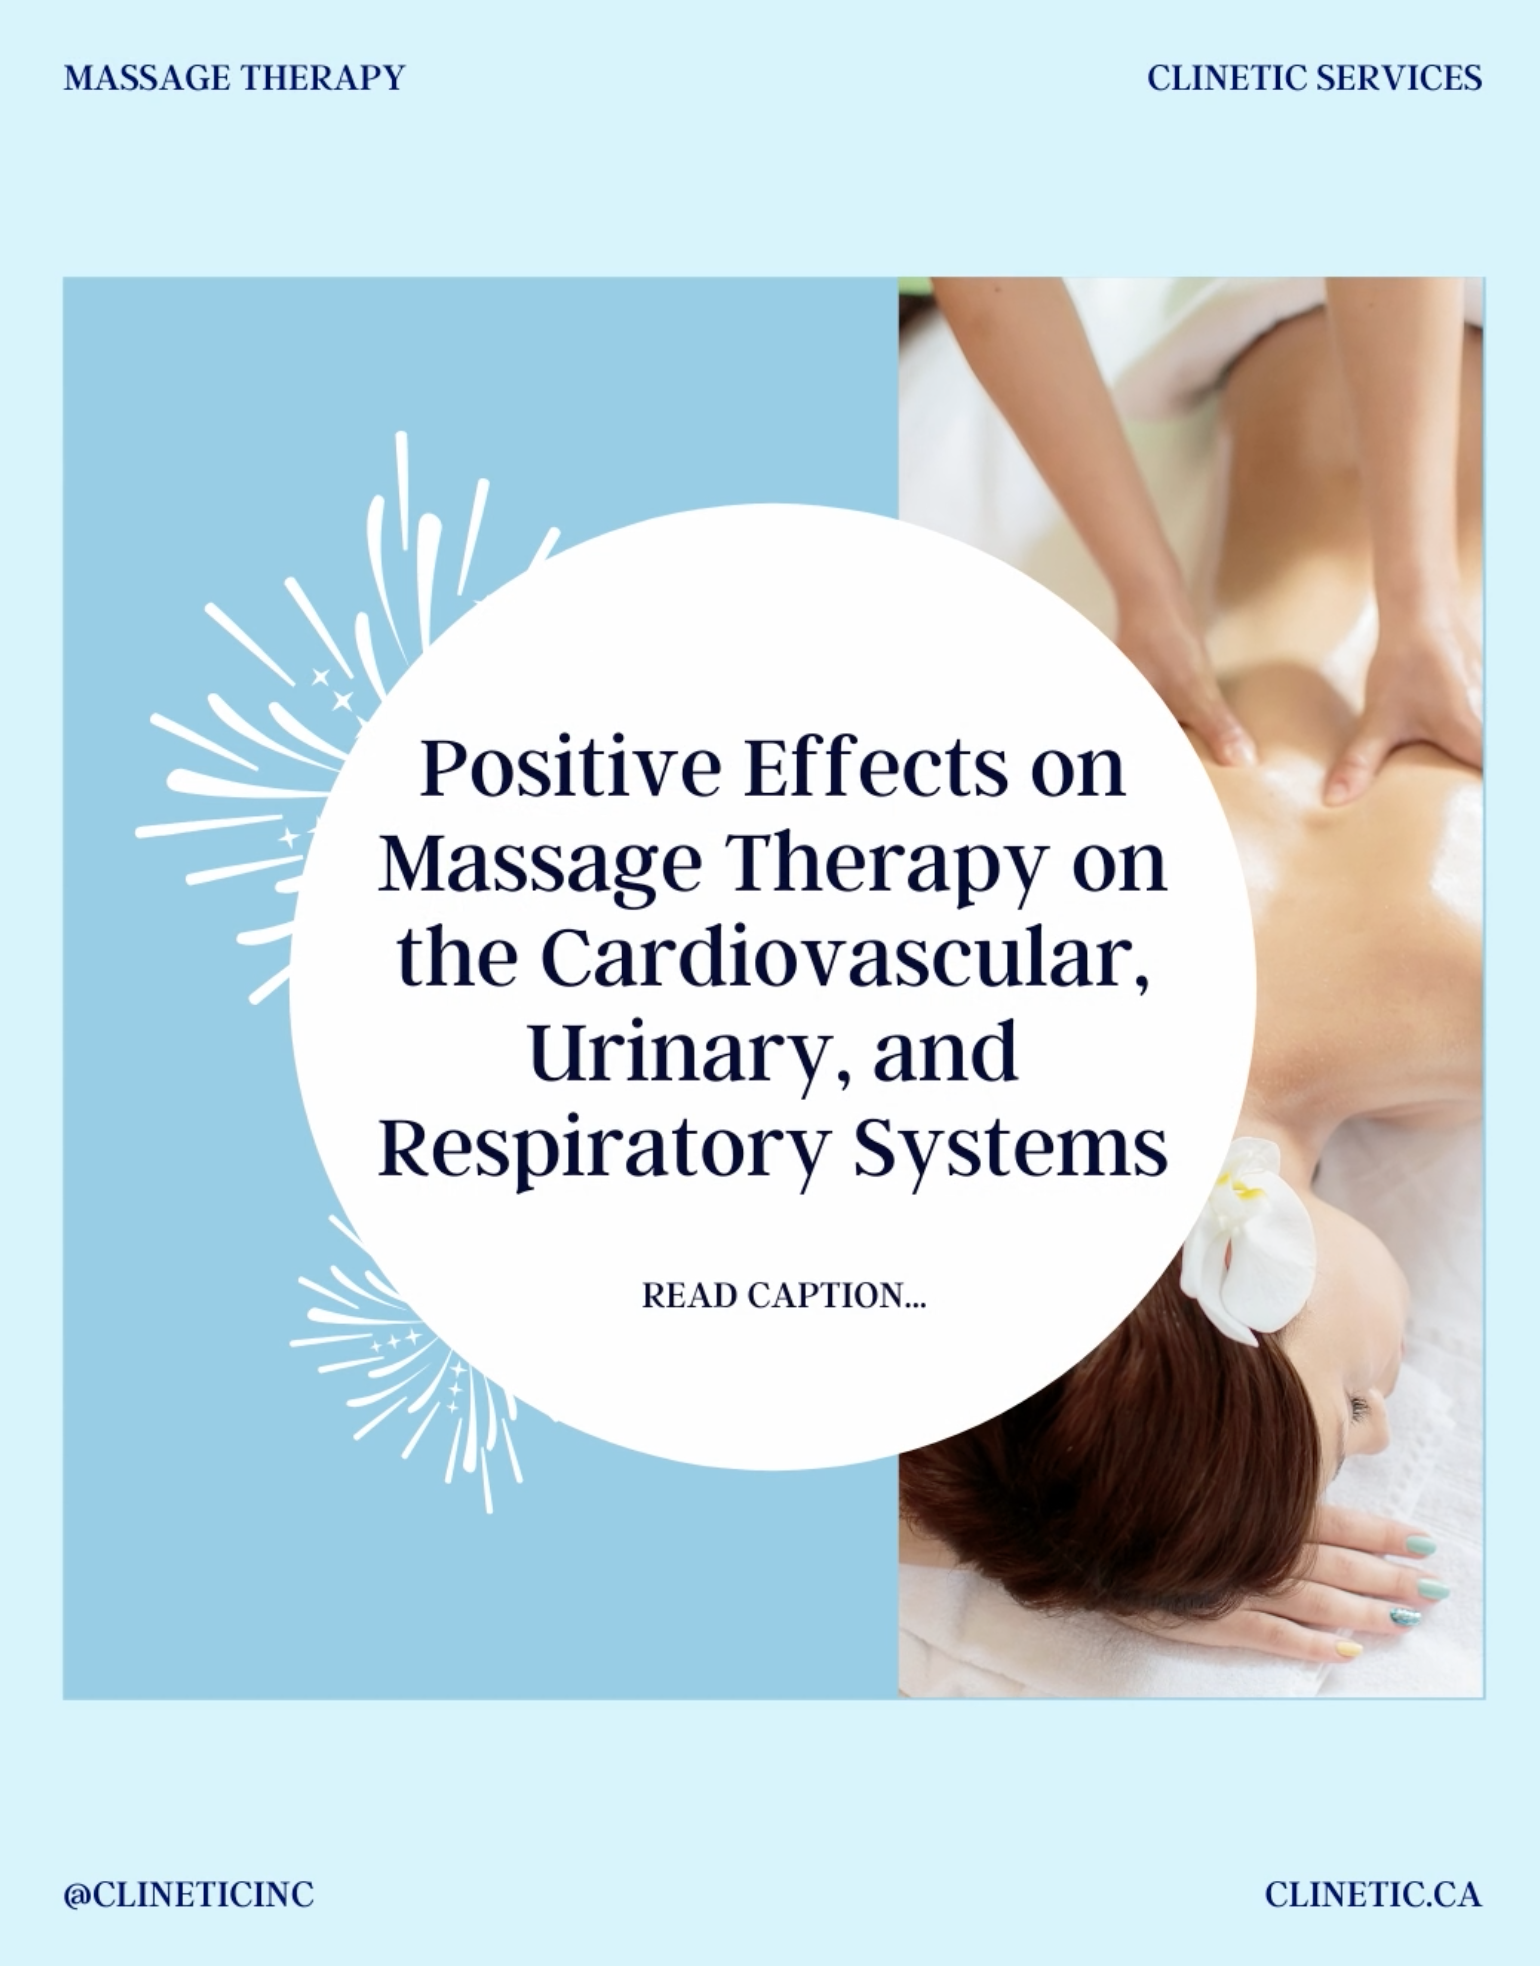 Positive Effects on Massage Therapy on the Cardiovascular, Urinary, and Respiratory Systems.